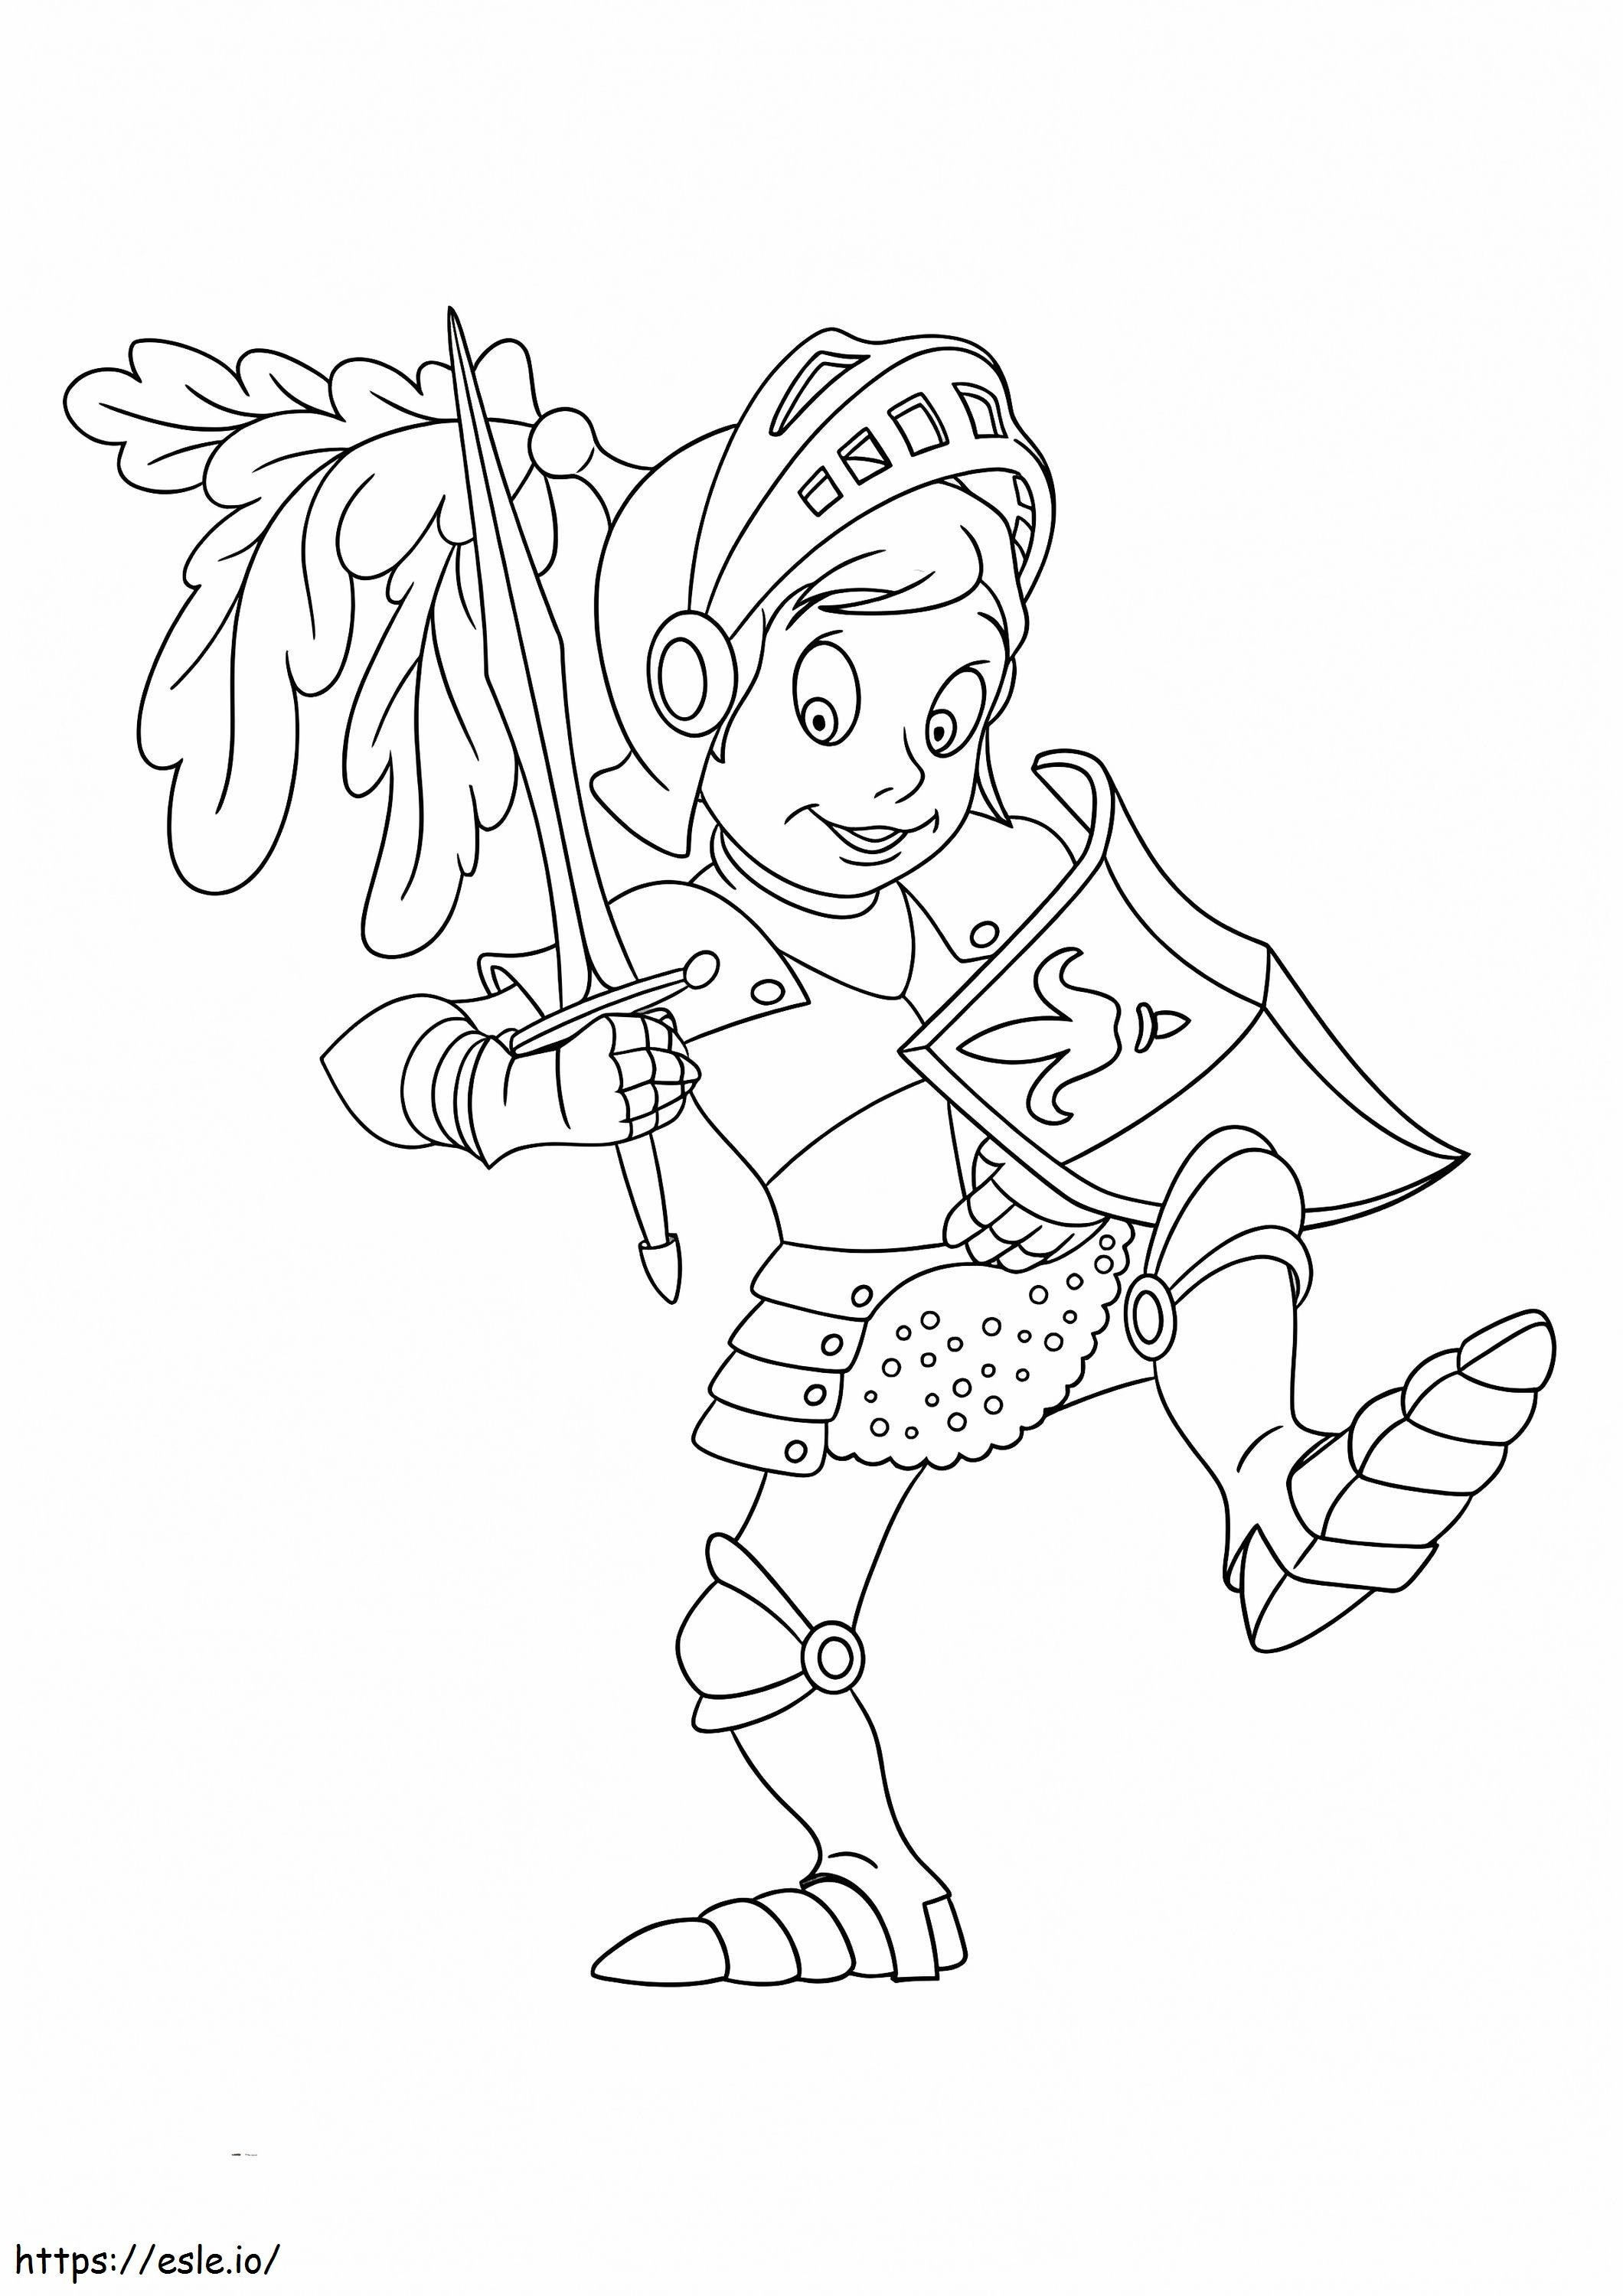 Knight Costume For Carnival coloring page